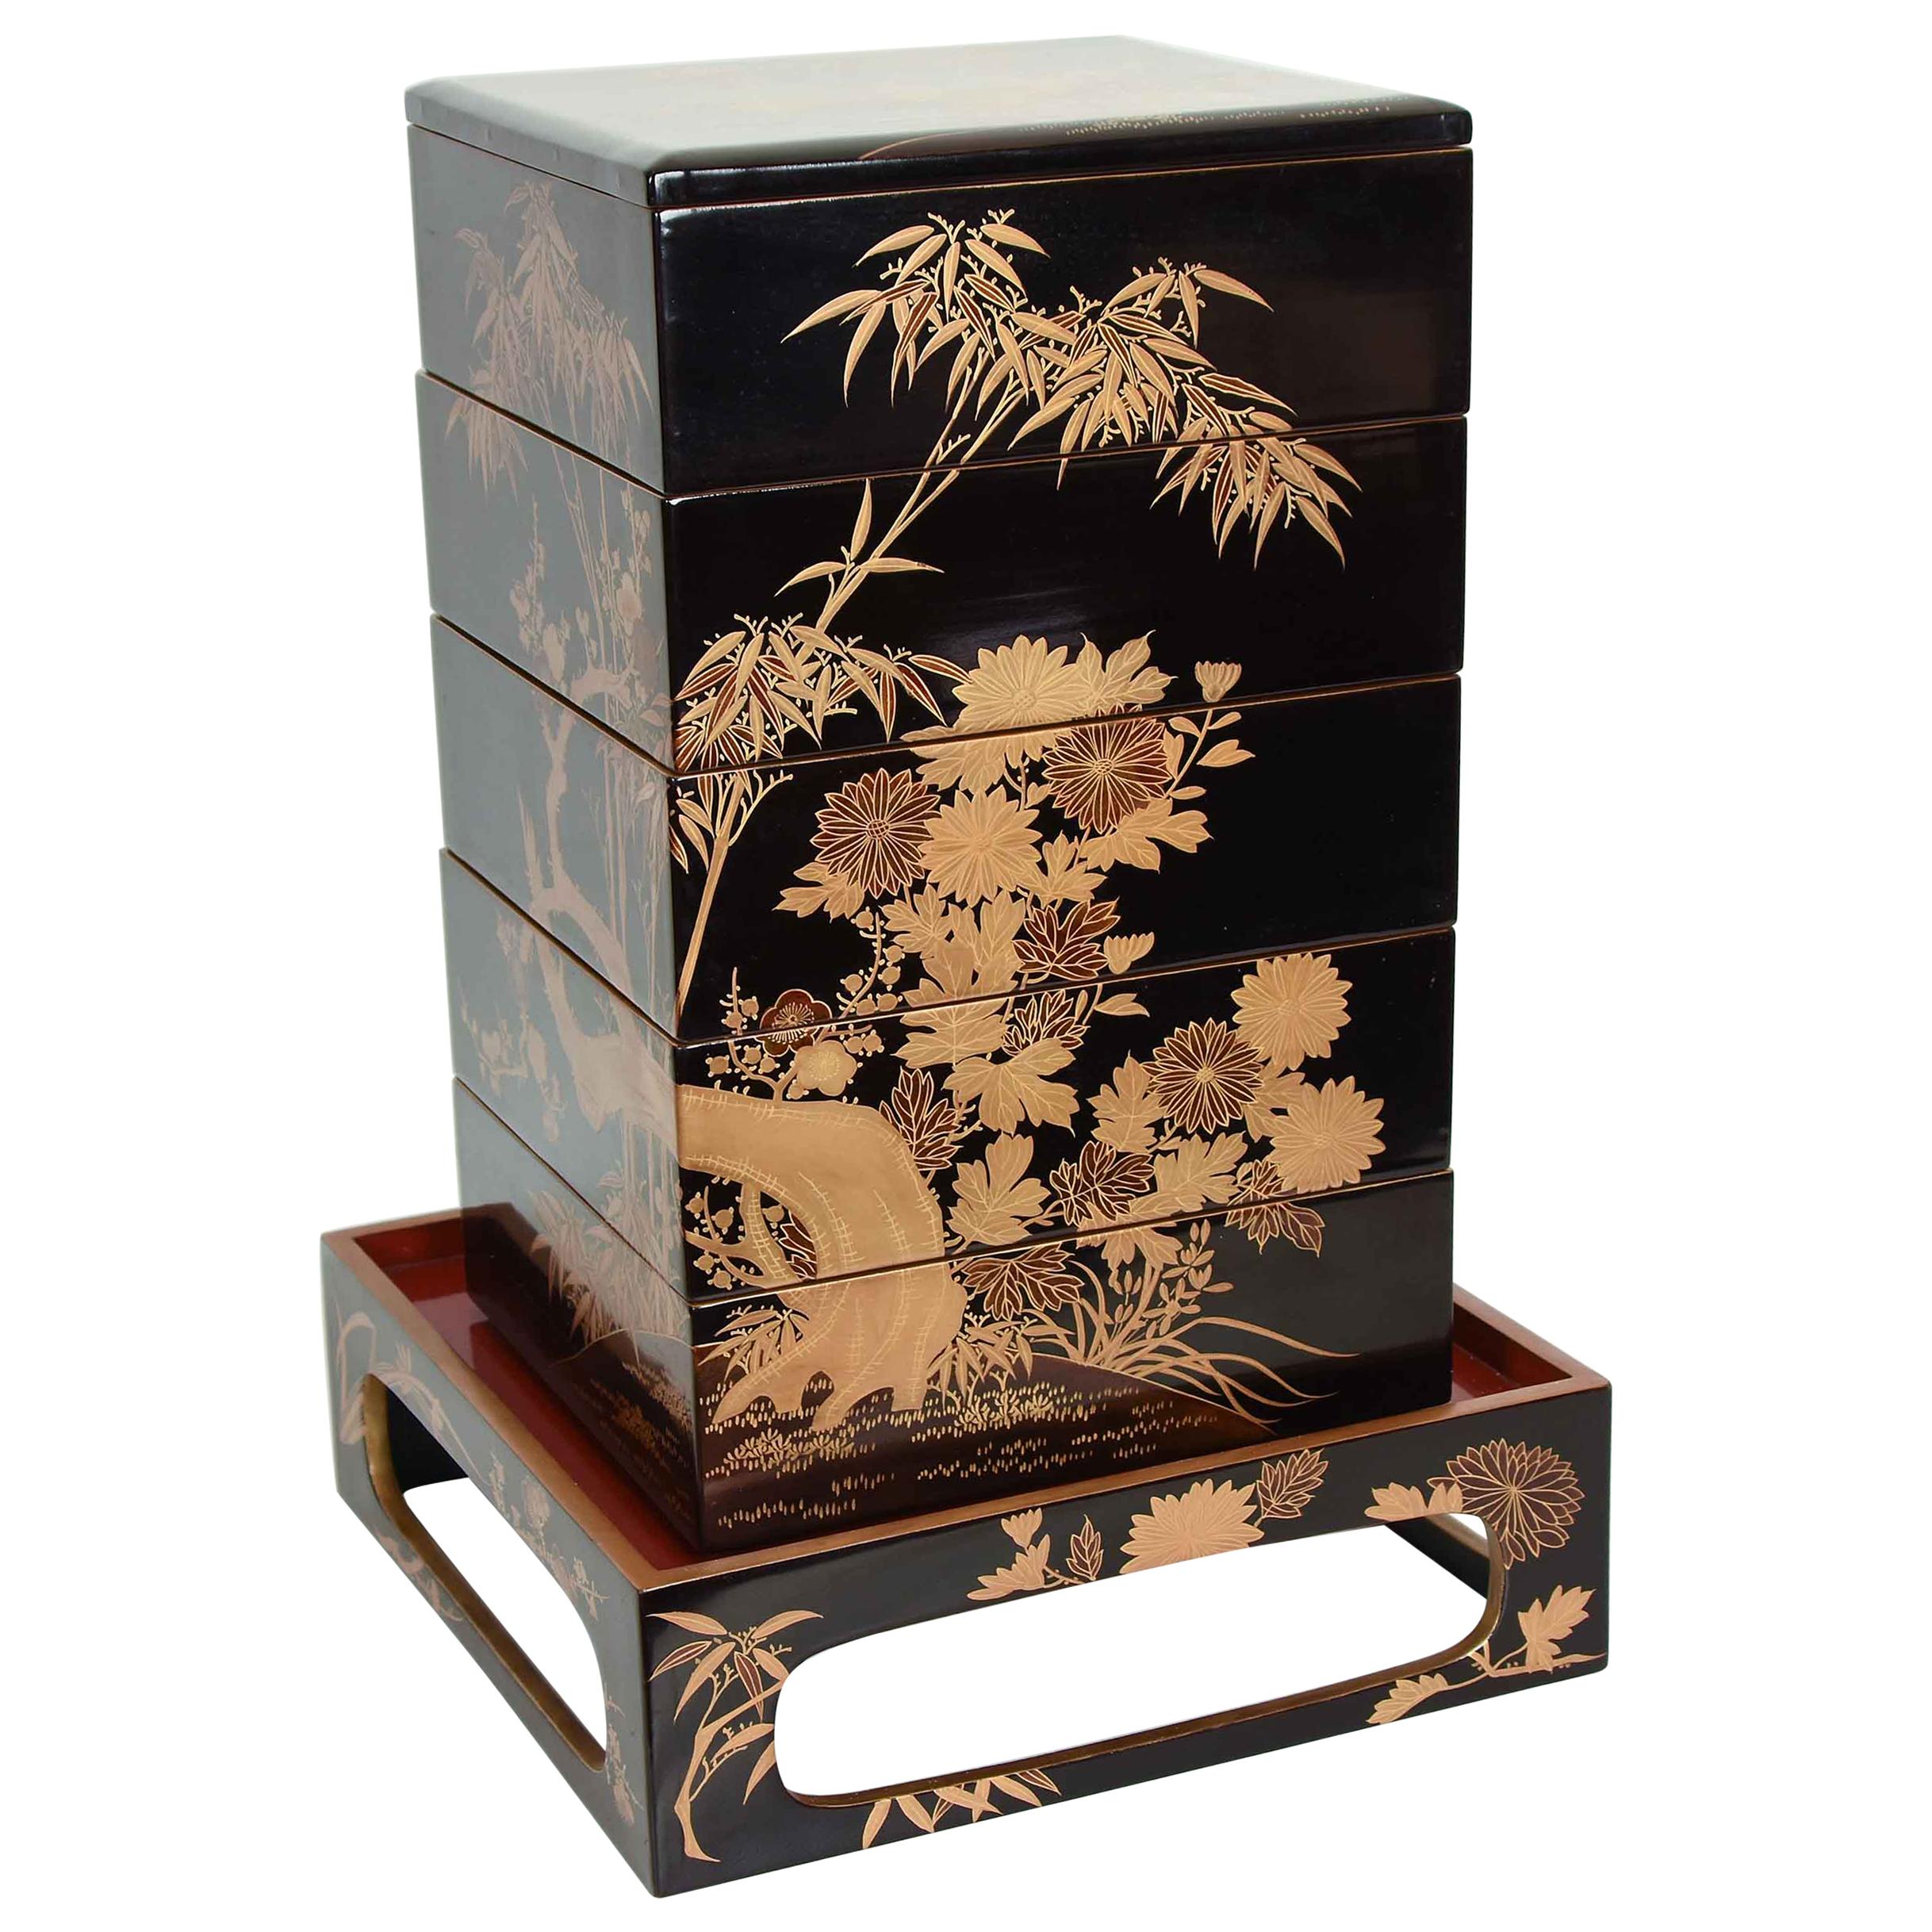 Antique Japanese Black Lacquer Jubako with Stand, Meiji Period, circa 1900